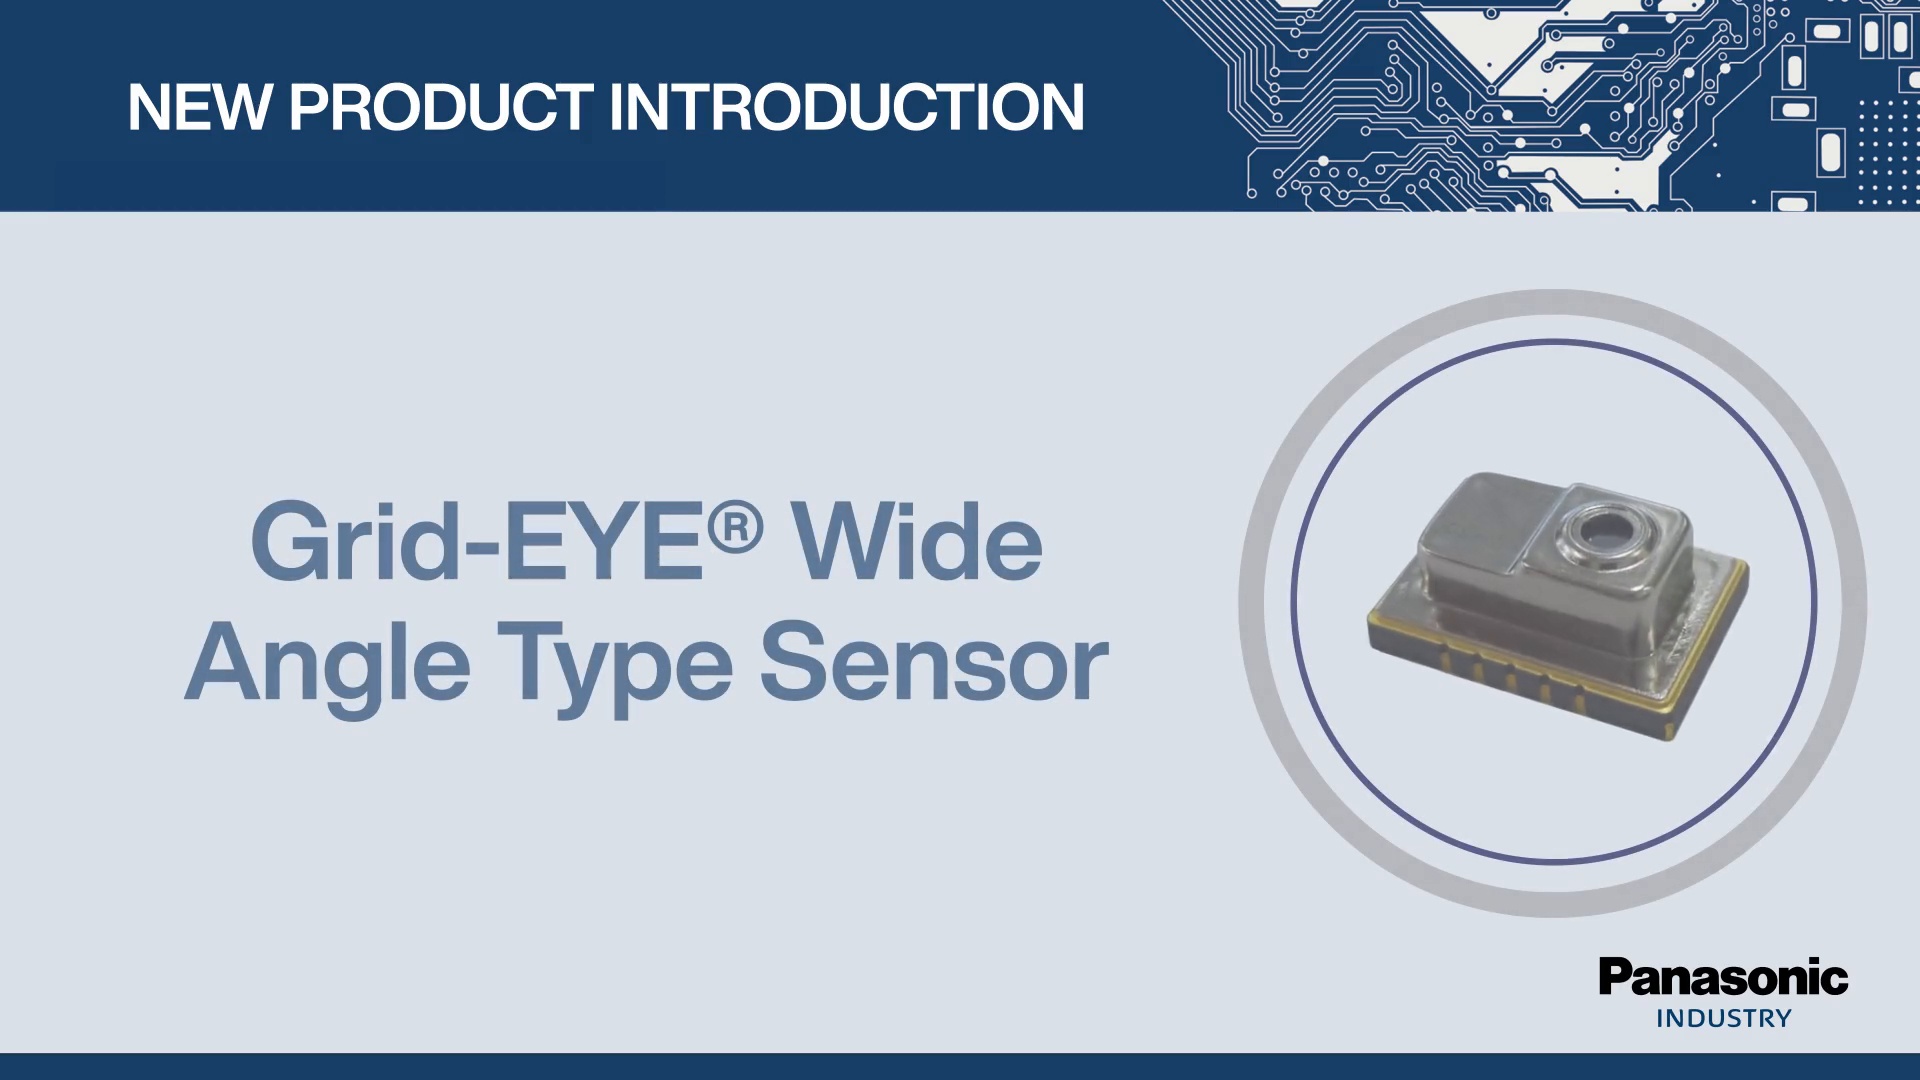 New Product Introduction: Grid-EYE® Wide Angle Type Sensor